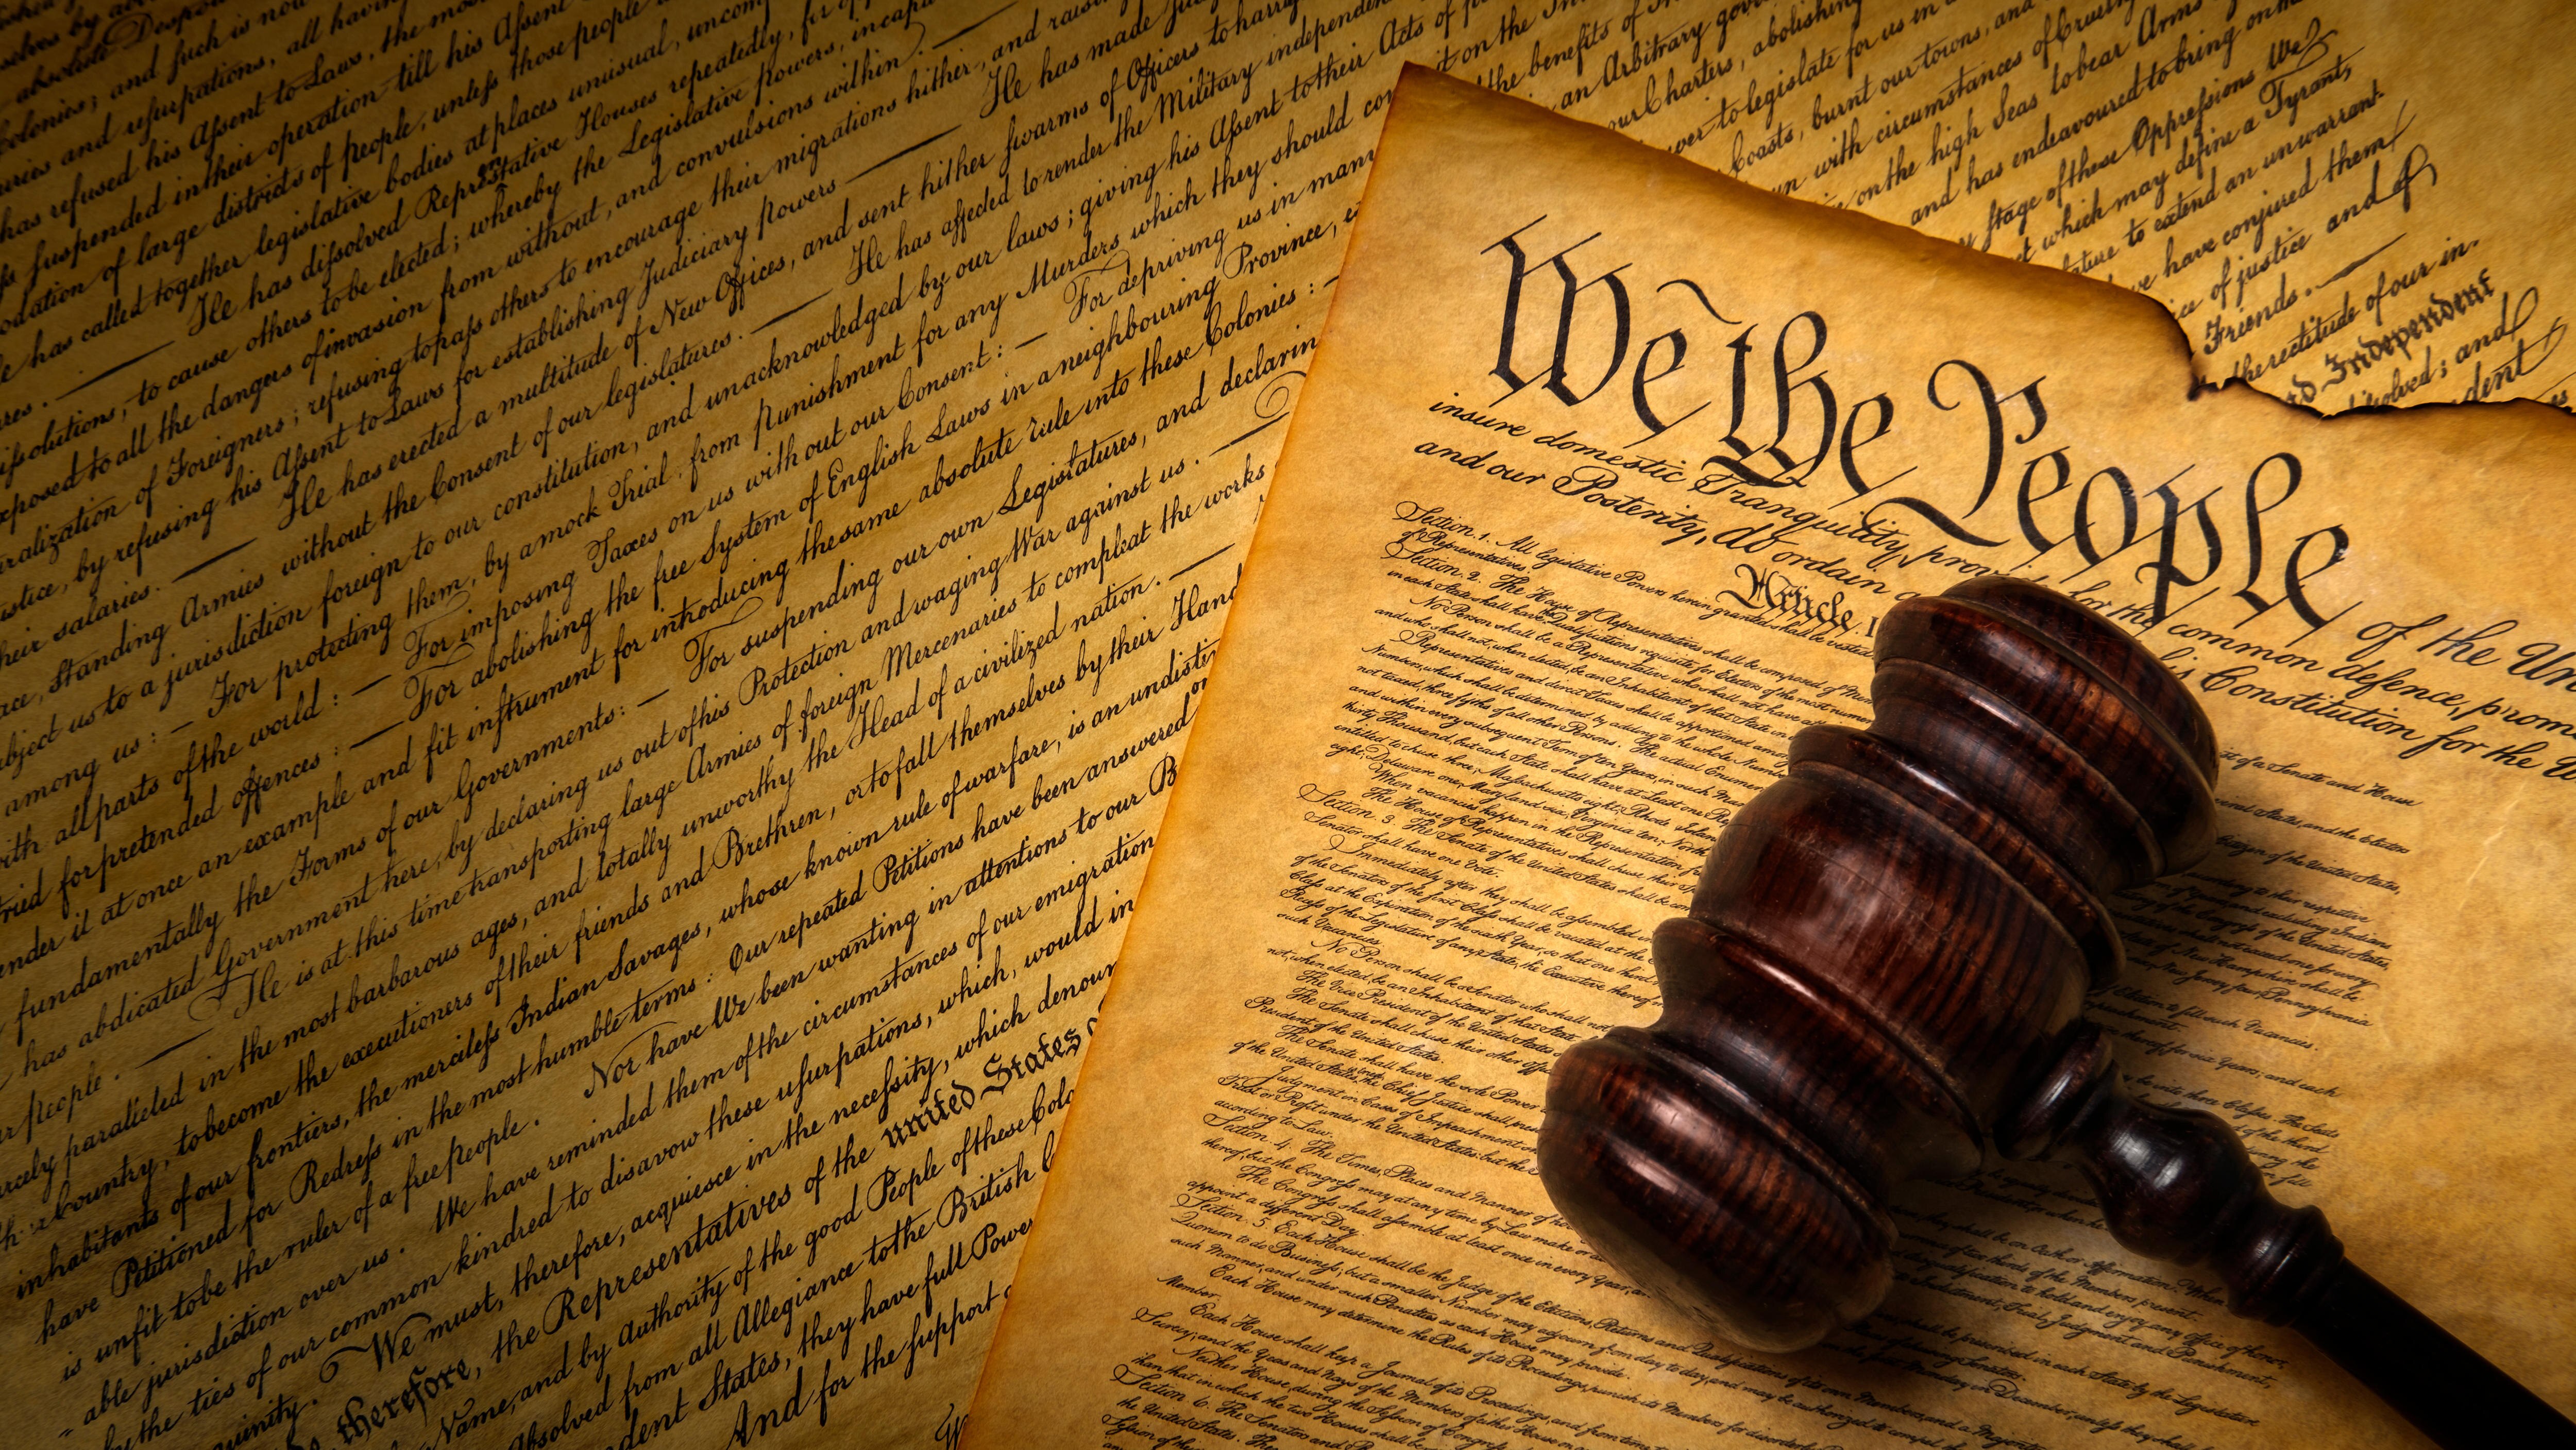 A.J. Jacobs: Following the US constitution's original meaning